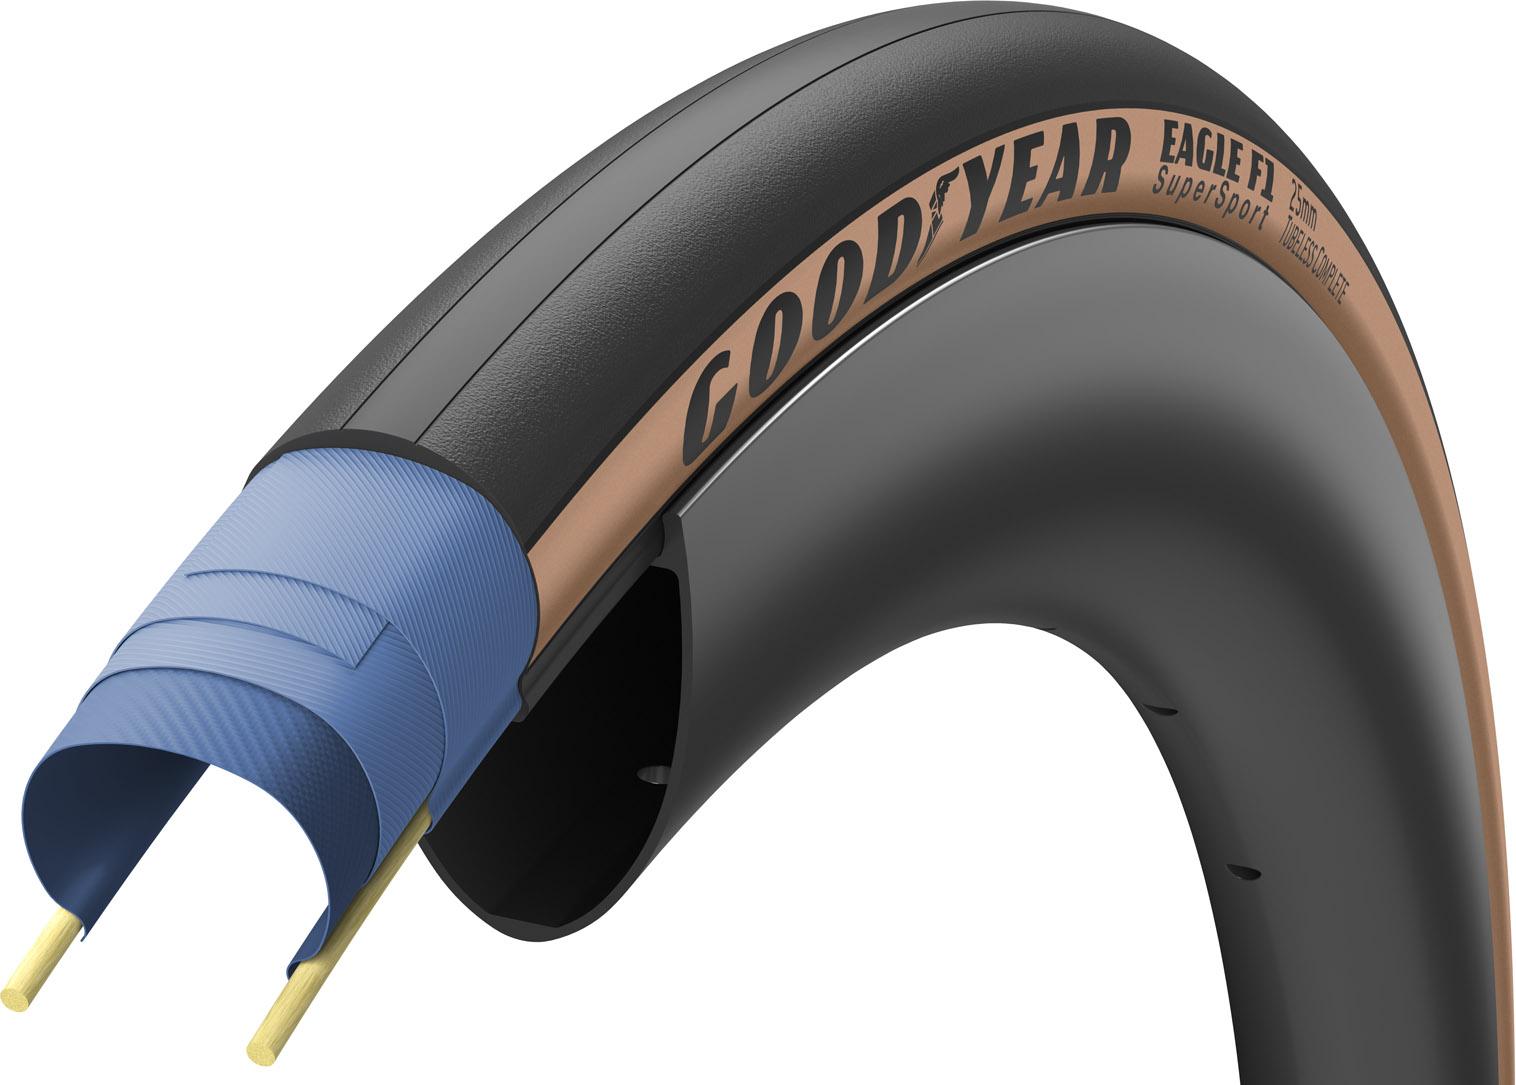 Goodyear Eagle F1 Supersport Tubeless Road Tyre  Black/tan Wall